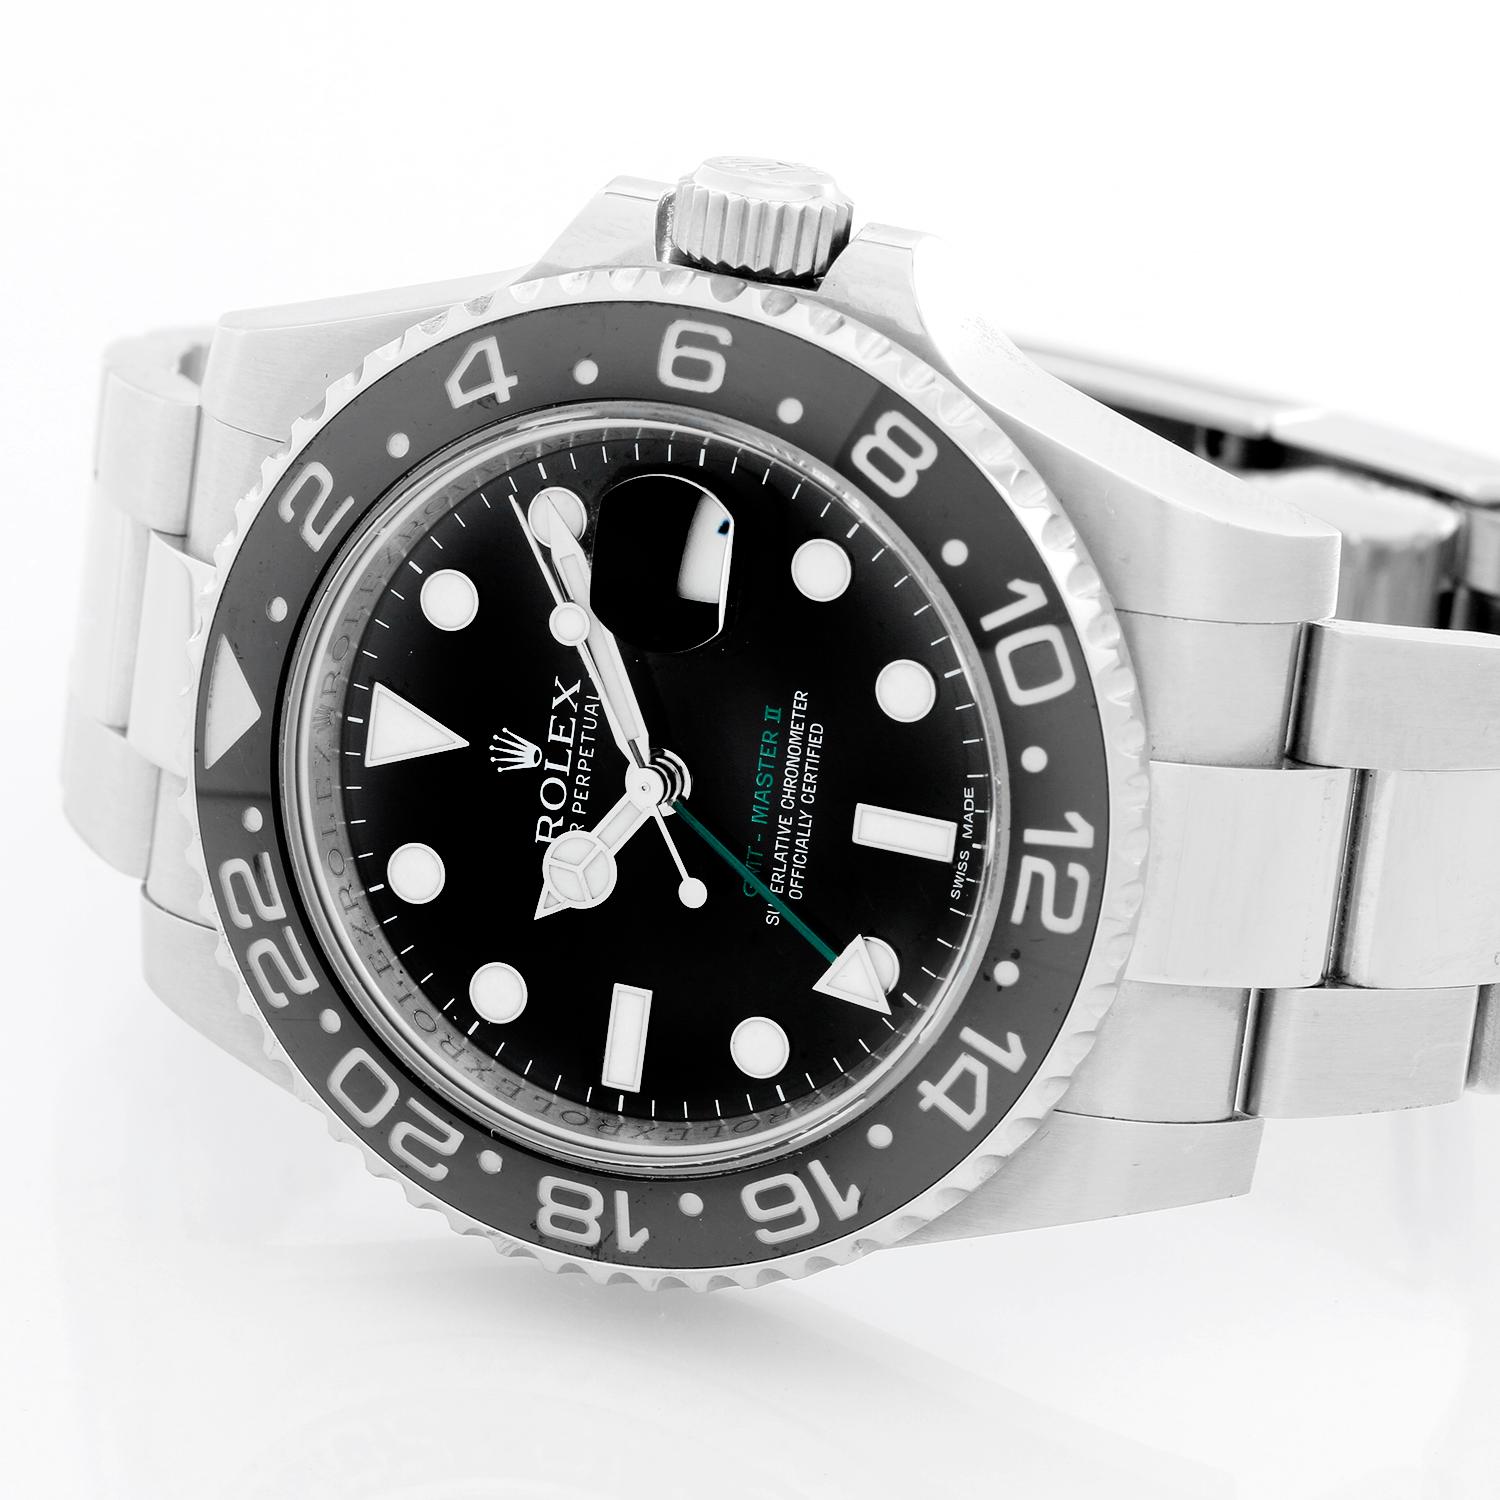 Men's Rolex GMT-Master II Watch 116710 ( 116710N ) - Automatic winding, 31 jewels. Stainless steel case with 24 hour ceramic bezel  ( 40 mm ). Black dial with luminous markers; green GMT hand. Stainless steel Oyster bracelet with flip-lock clasp.